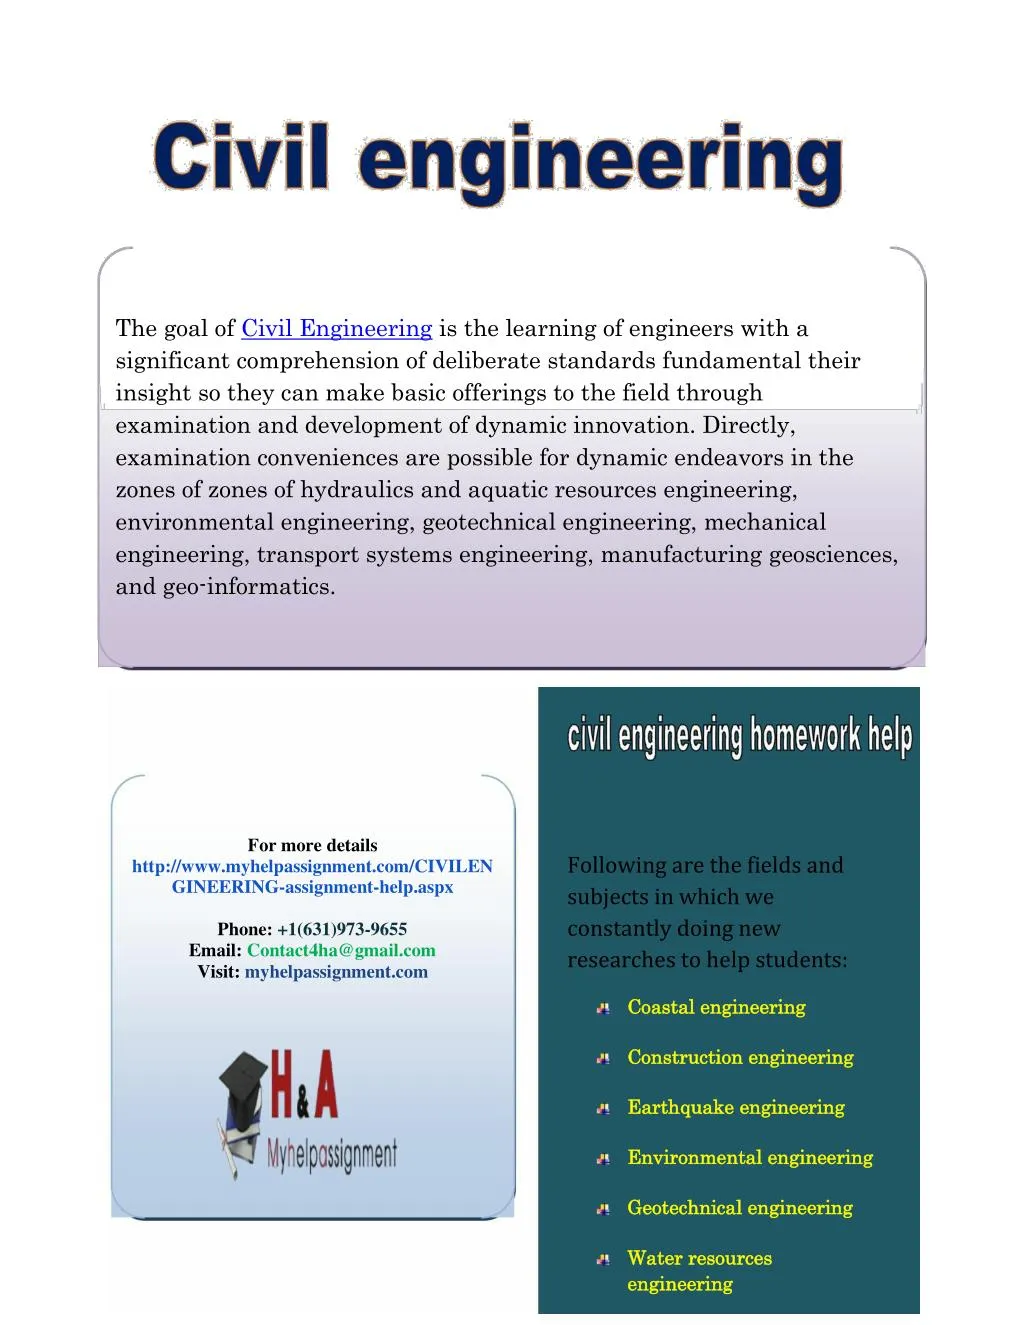 the goal of civil engineering is the learning